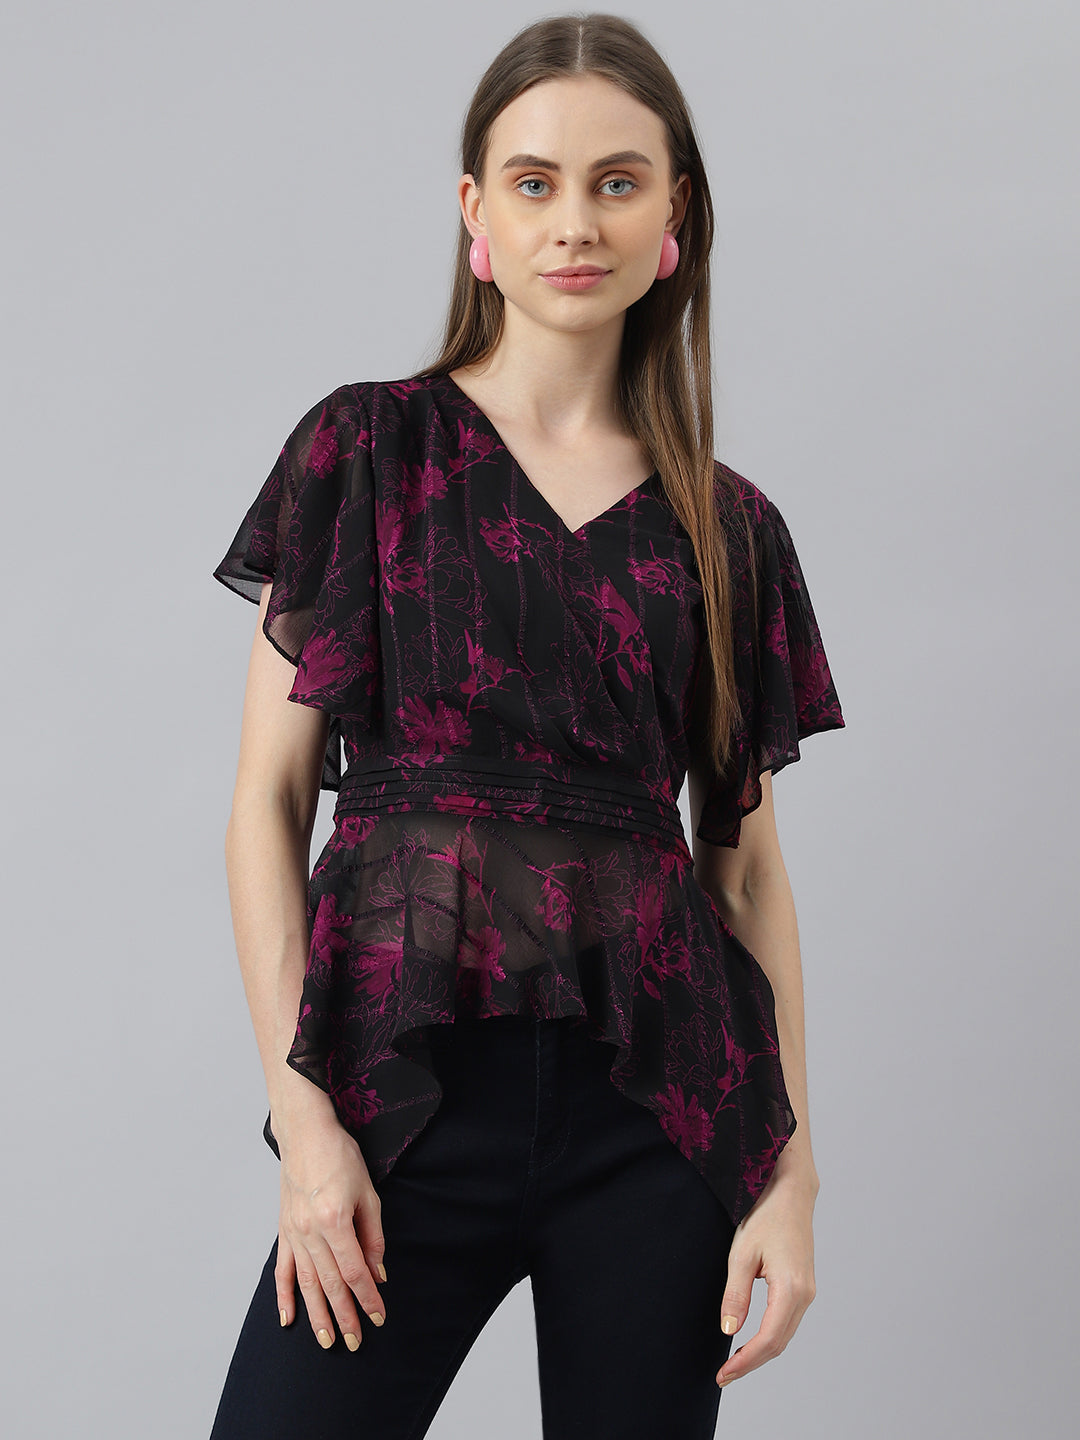 Black Half Sleeve V-Neck Floral Print Women Blouse Top for Casual